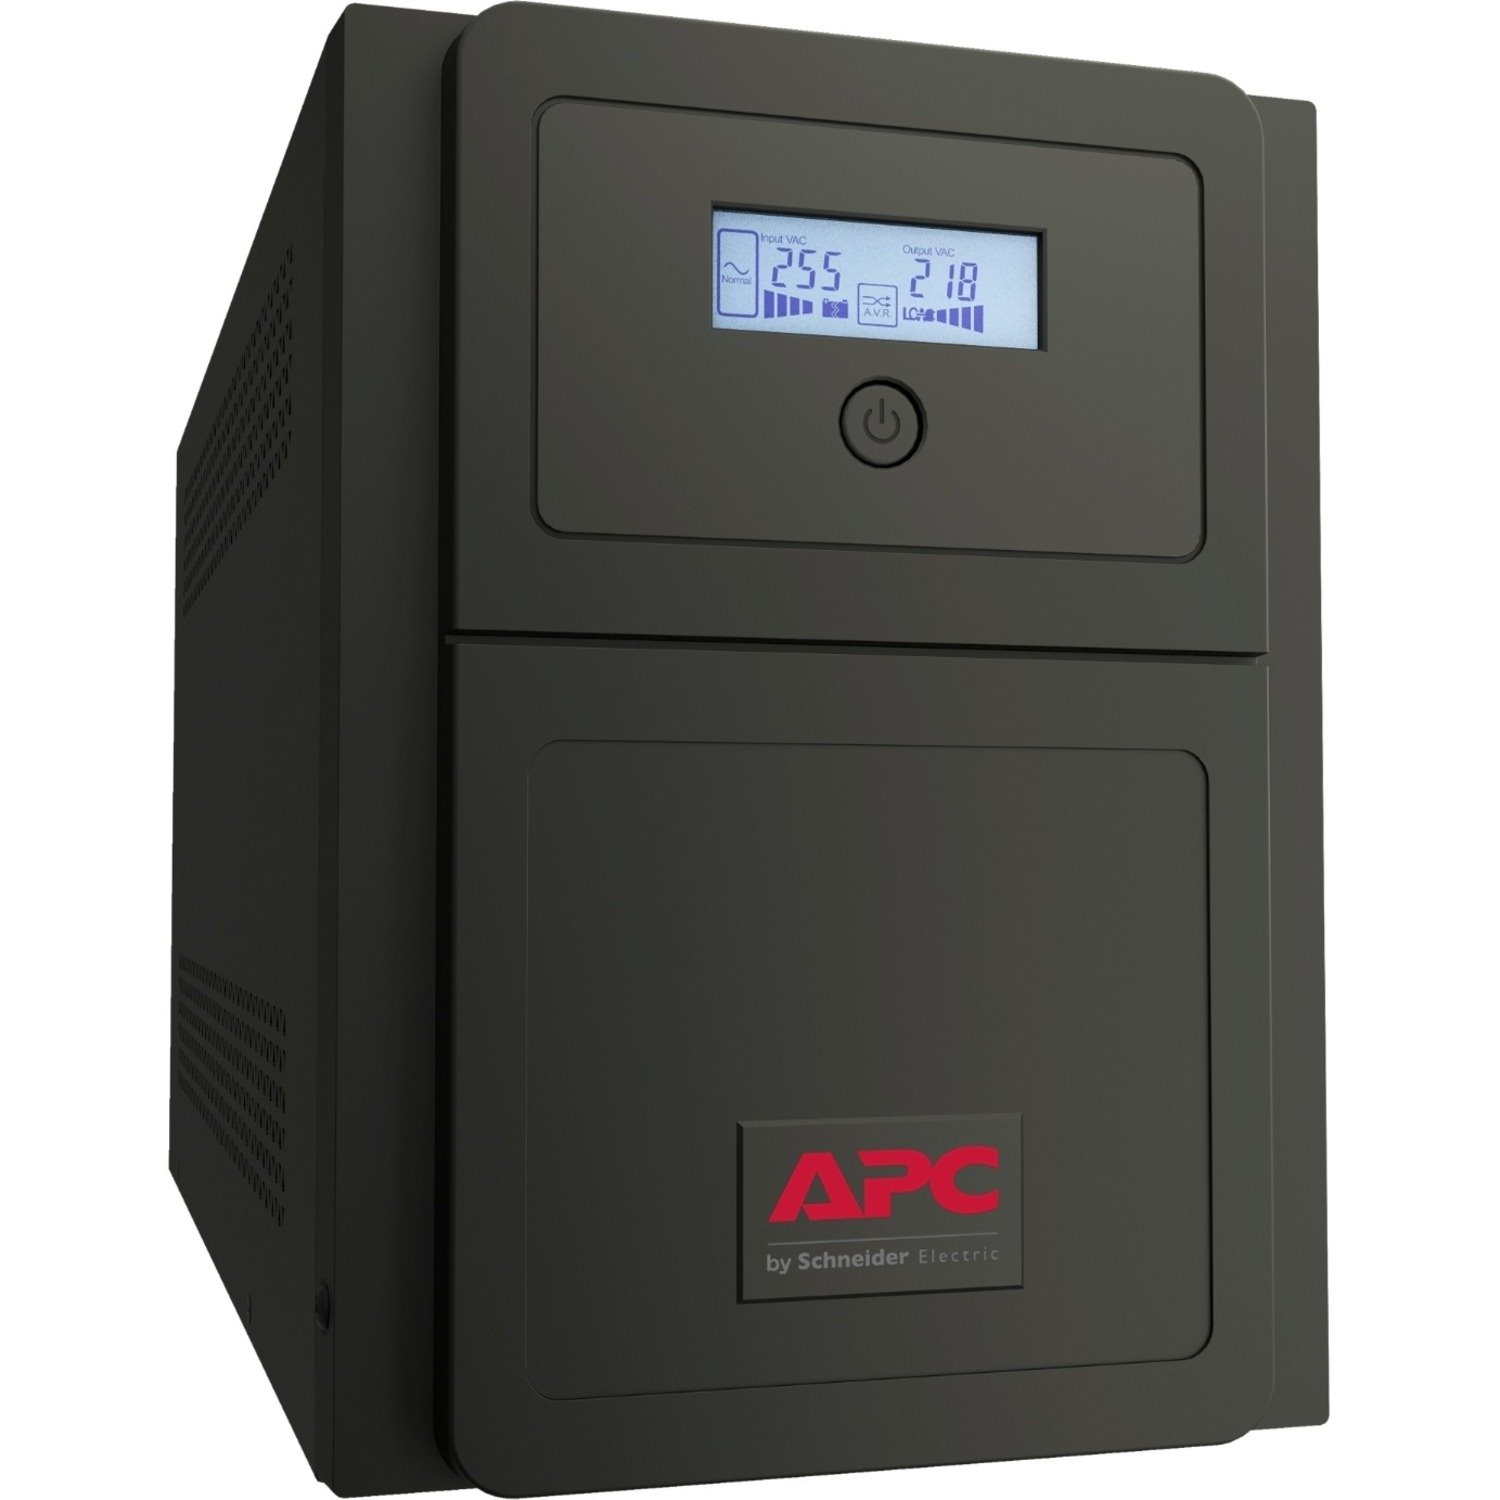 APC by Schneider Electric Easy UPS 1.5kVA Tower UPS